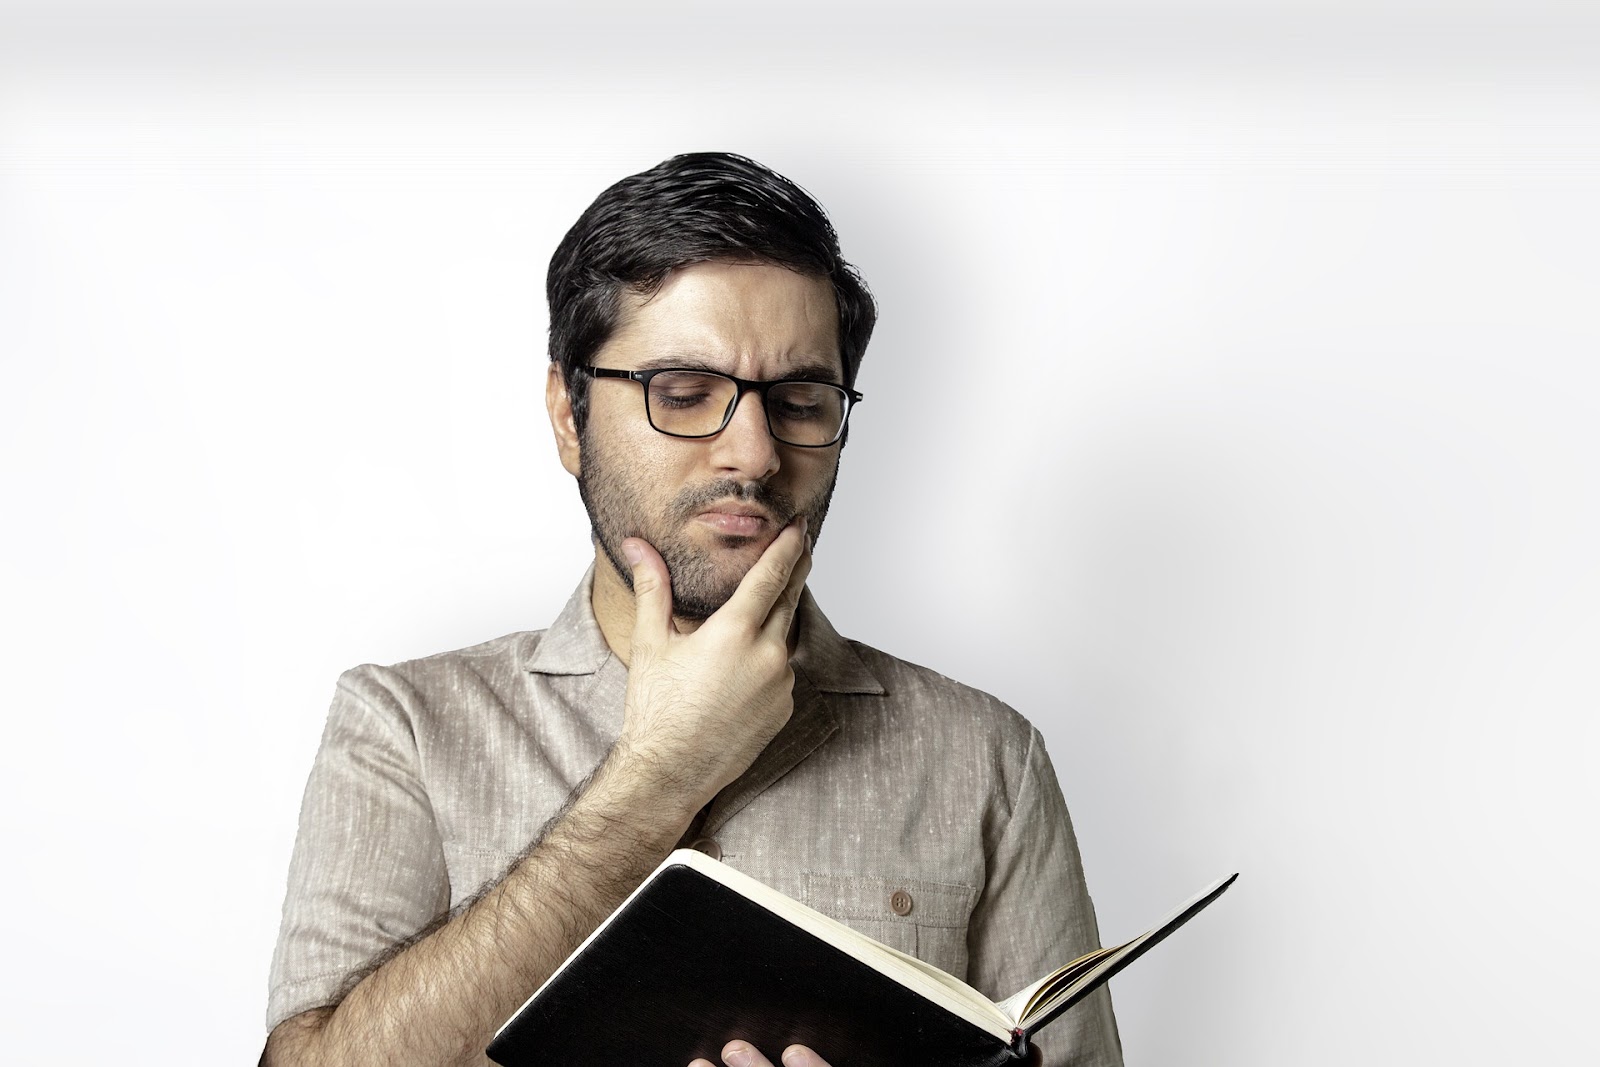 A picture of a man pondering what's written in an academic journal